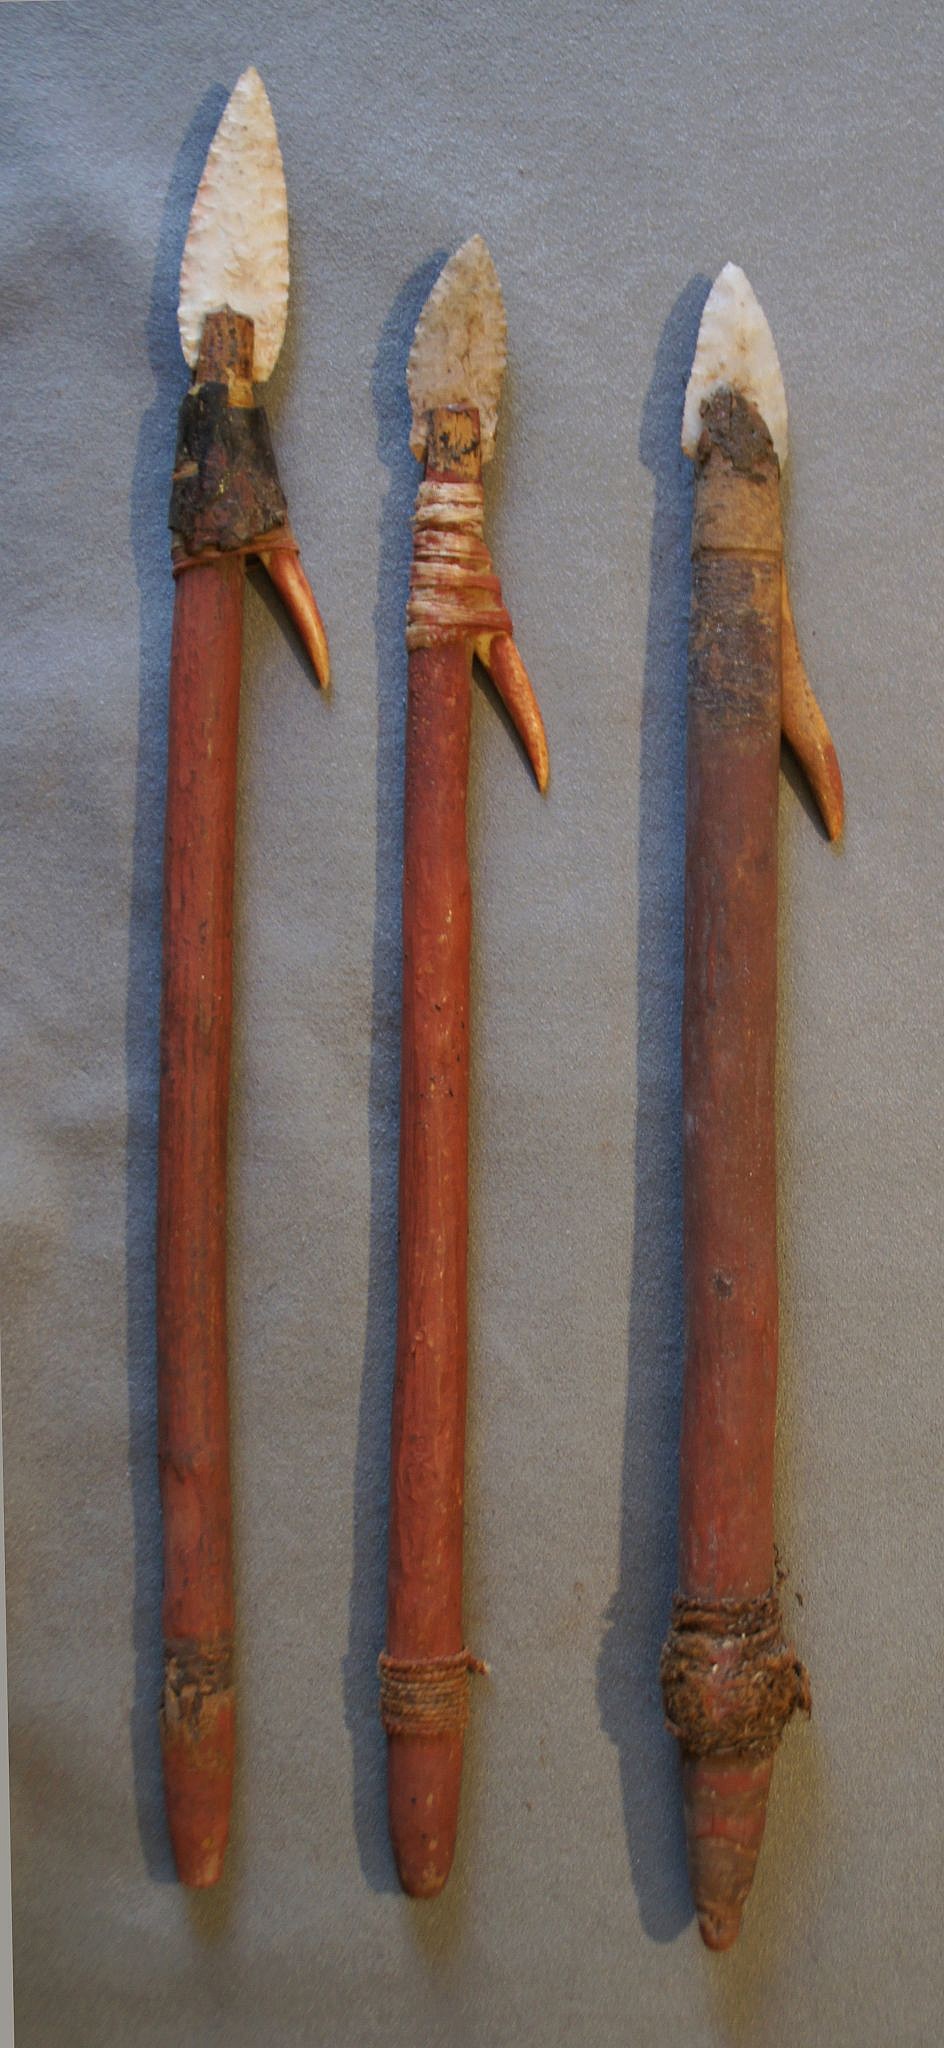 Chile, Three Early Seal Harpoons with Oval Stone Points, Bone Barbs and Wood Shafts
These harpoons have a slit at one end of a wood shaft, to which a napped point is attached and secured with wrapped string and tree resin.  The opposite end of the shaft was carved to a tapered point that fit into the socket of the harpoon thrower. This size harpoon was used to capture seals, which were used for food, fat, and skins.
Media: Wood
Dimensions: Length: 9"-10"
n6028